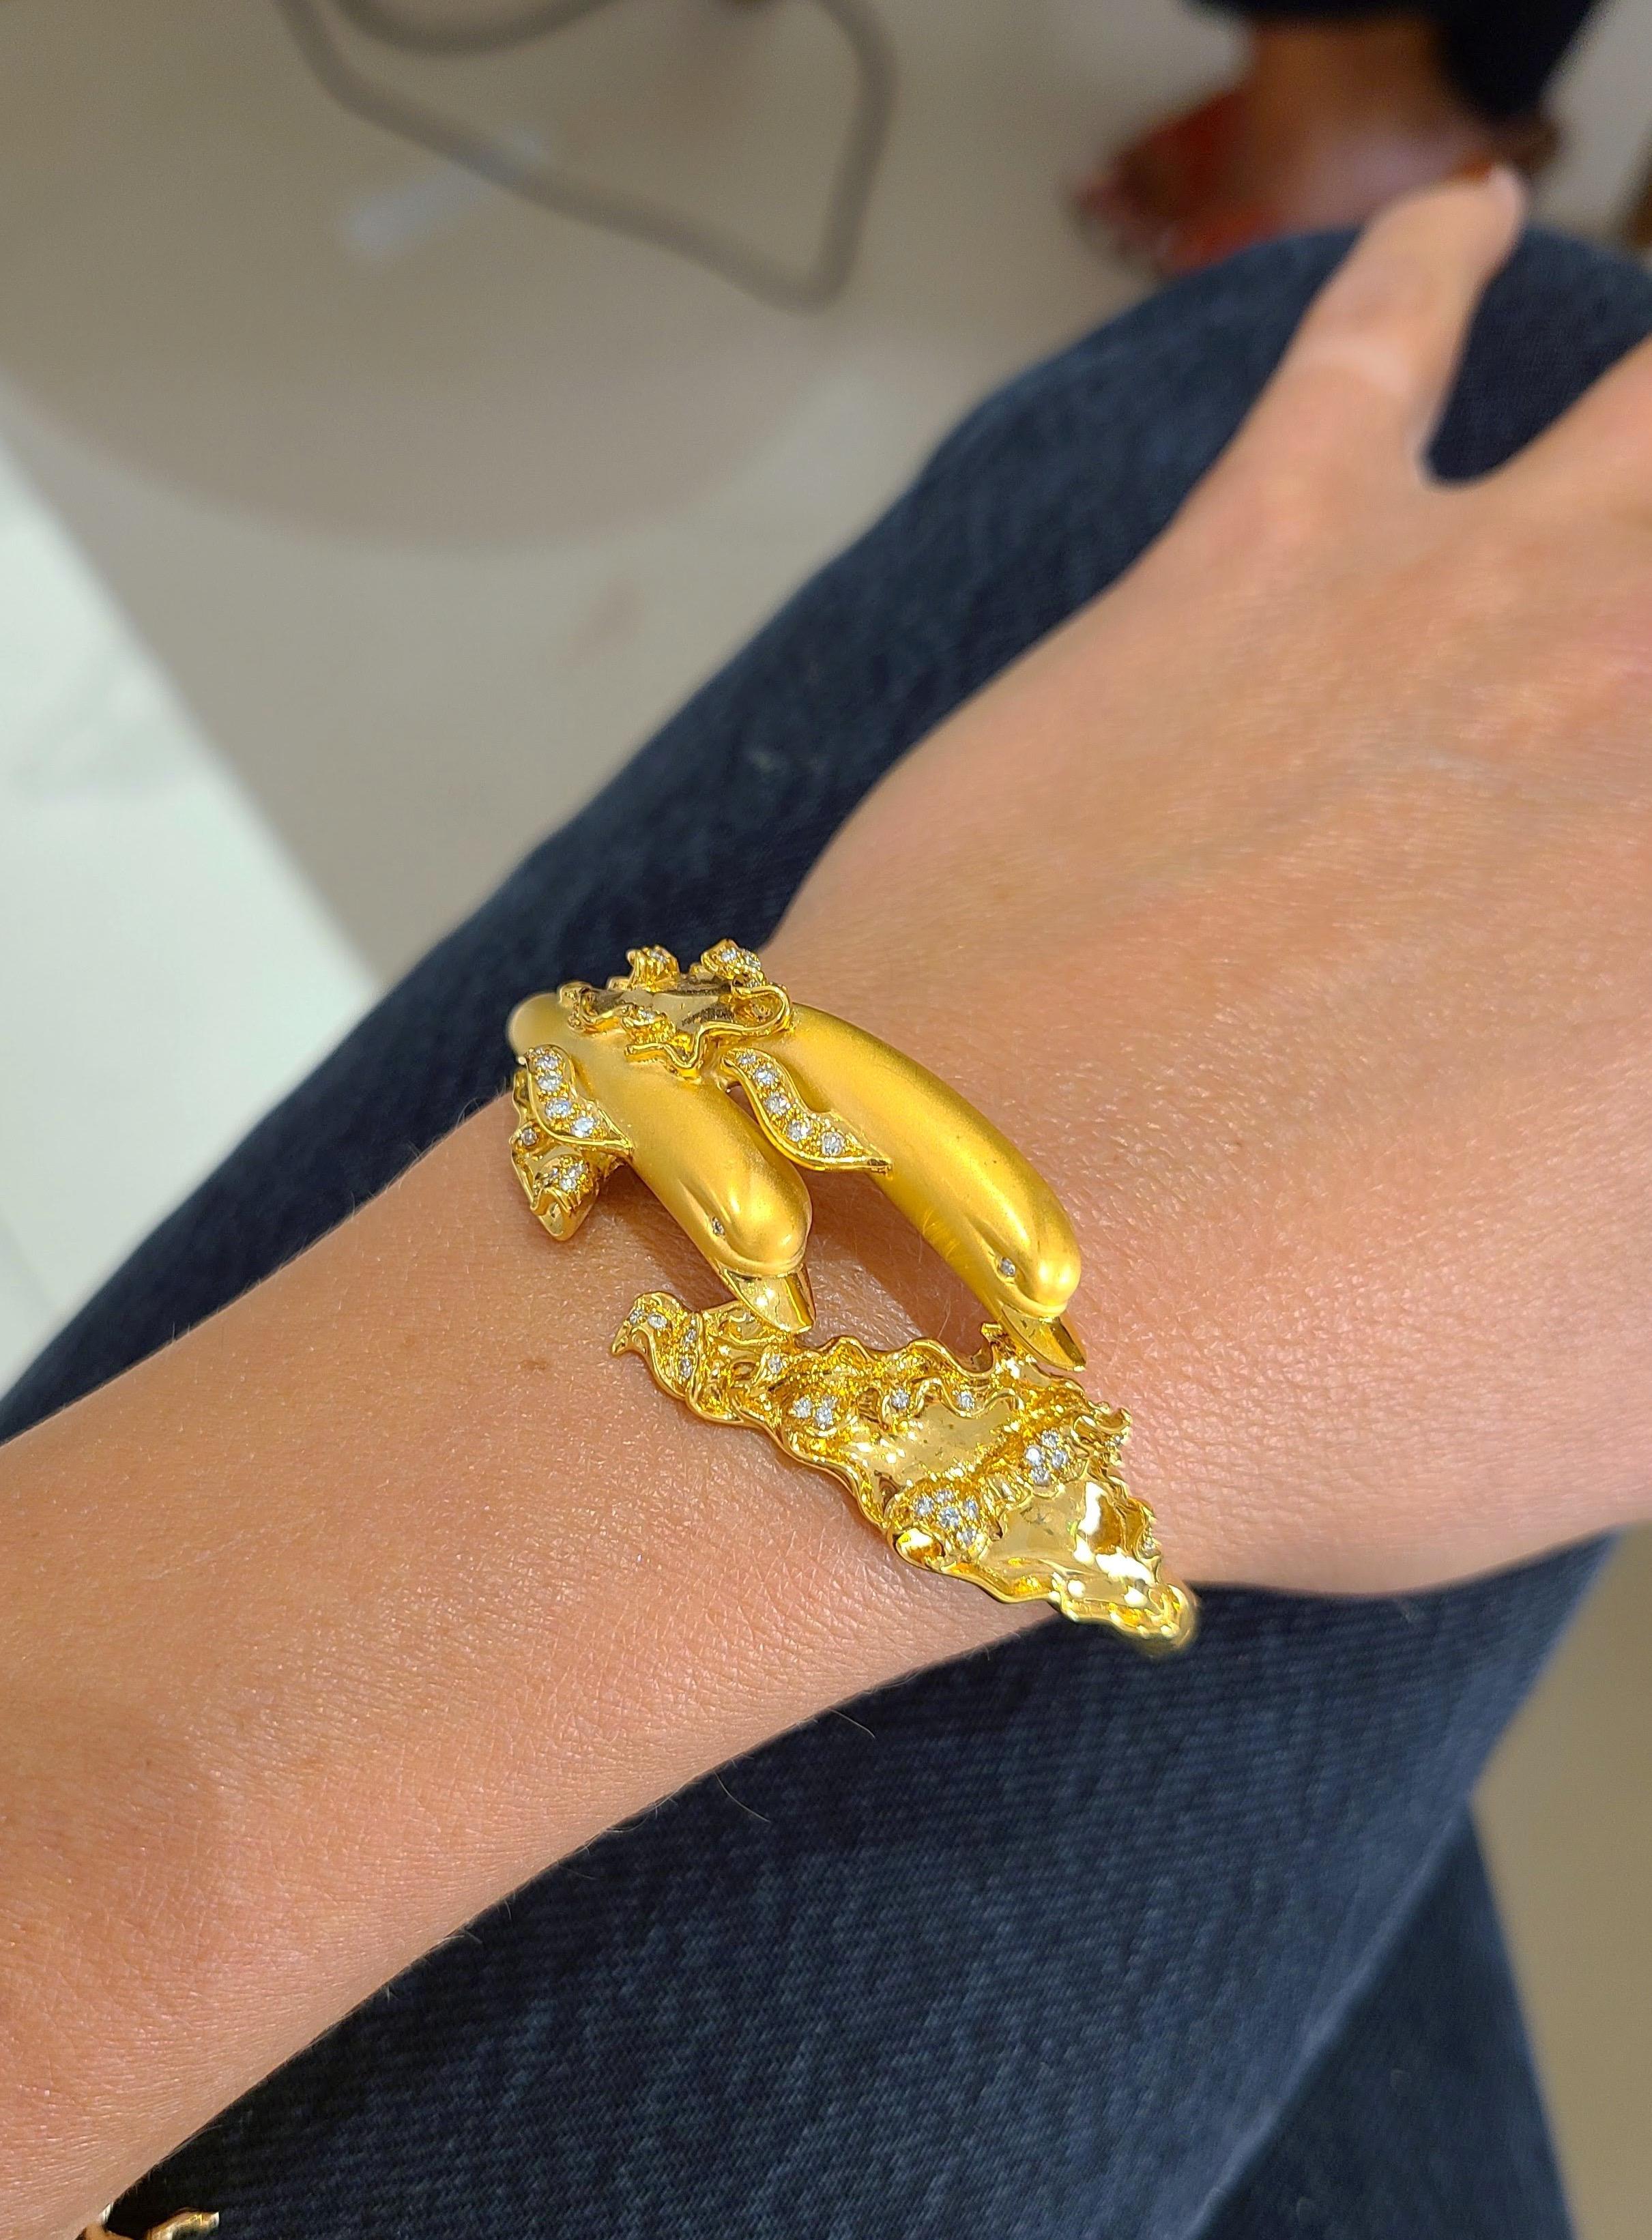 Carrera Y Carrera has built its famous name on figurative designs, an obsession with surface finishes, and a compelling way of seeing beauty in art and nature. This 18 karat yellow gold bangle/cuff bracelet is a perfect example of Carrera's iconic